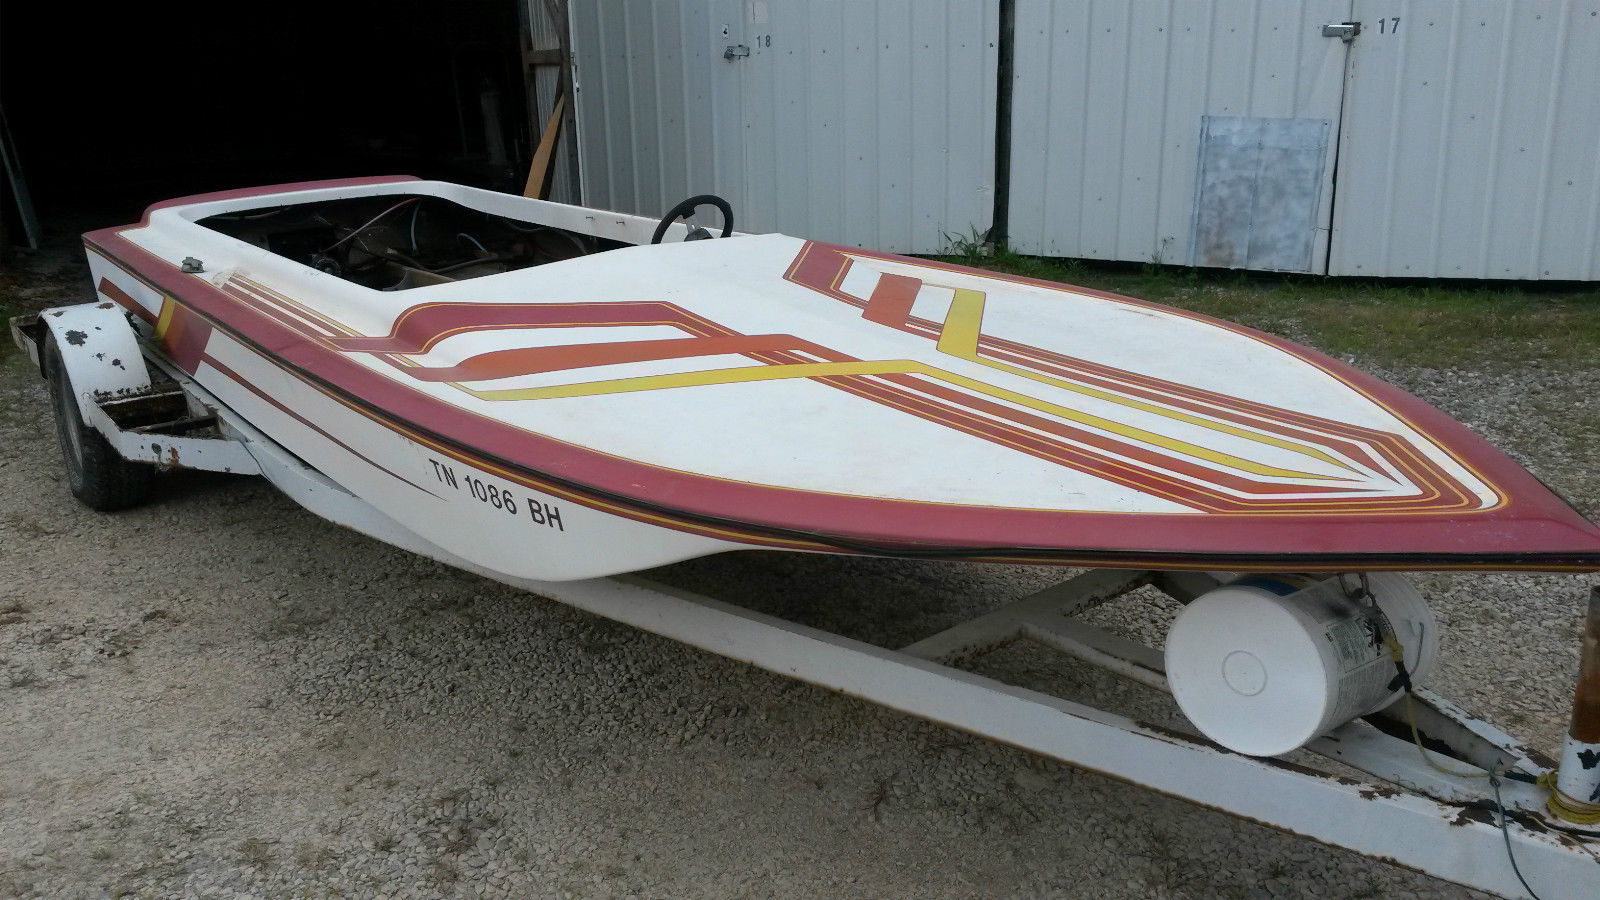 MANTRA TX 19 1986 for sale for $795 - Boats-from-USA.com